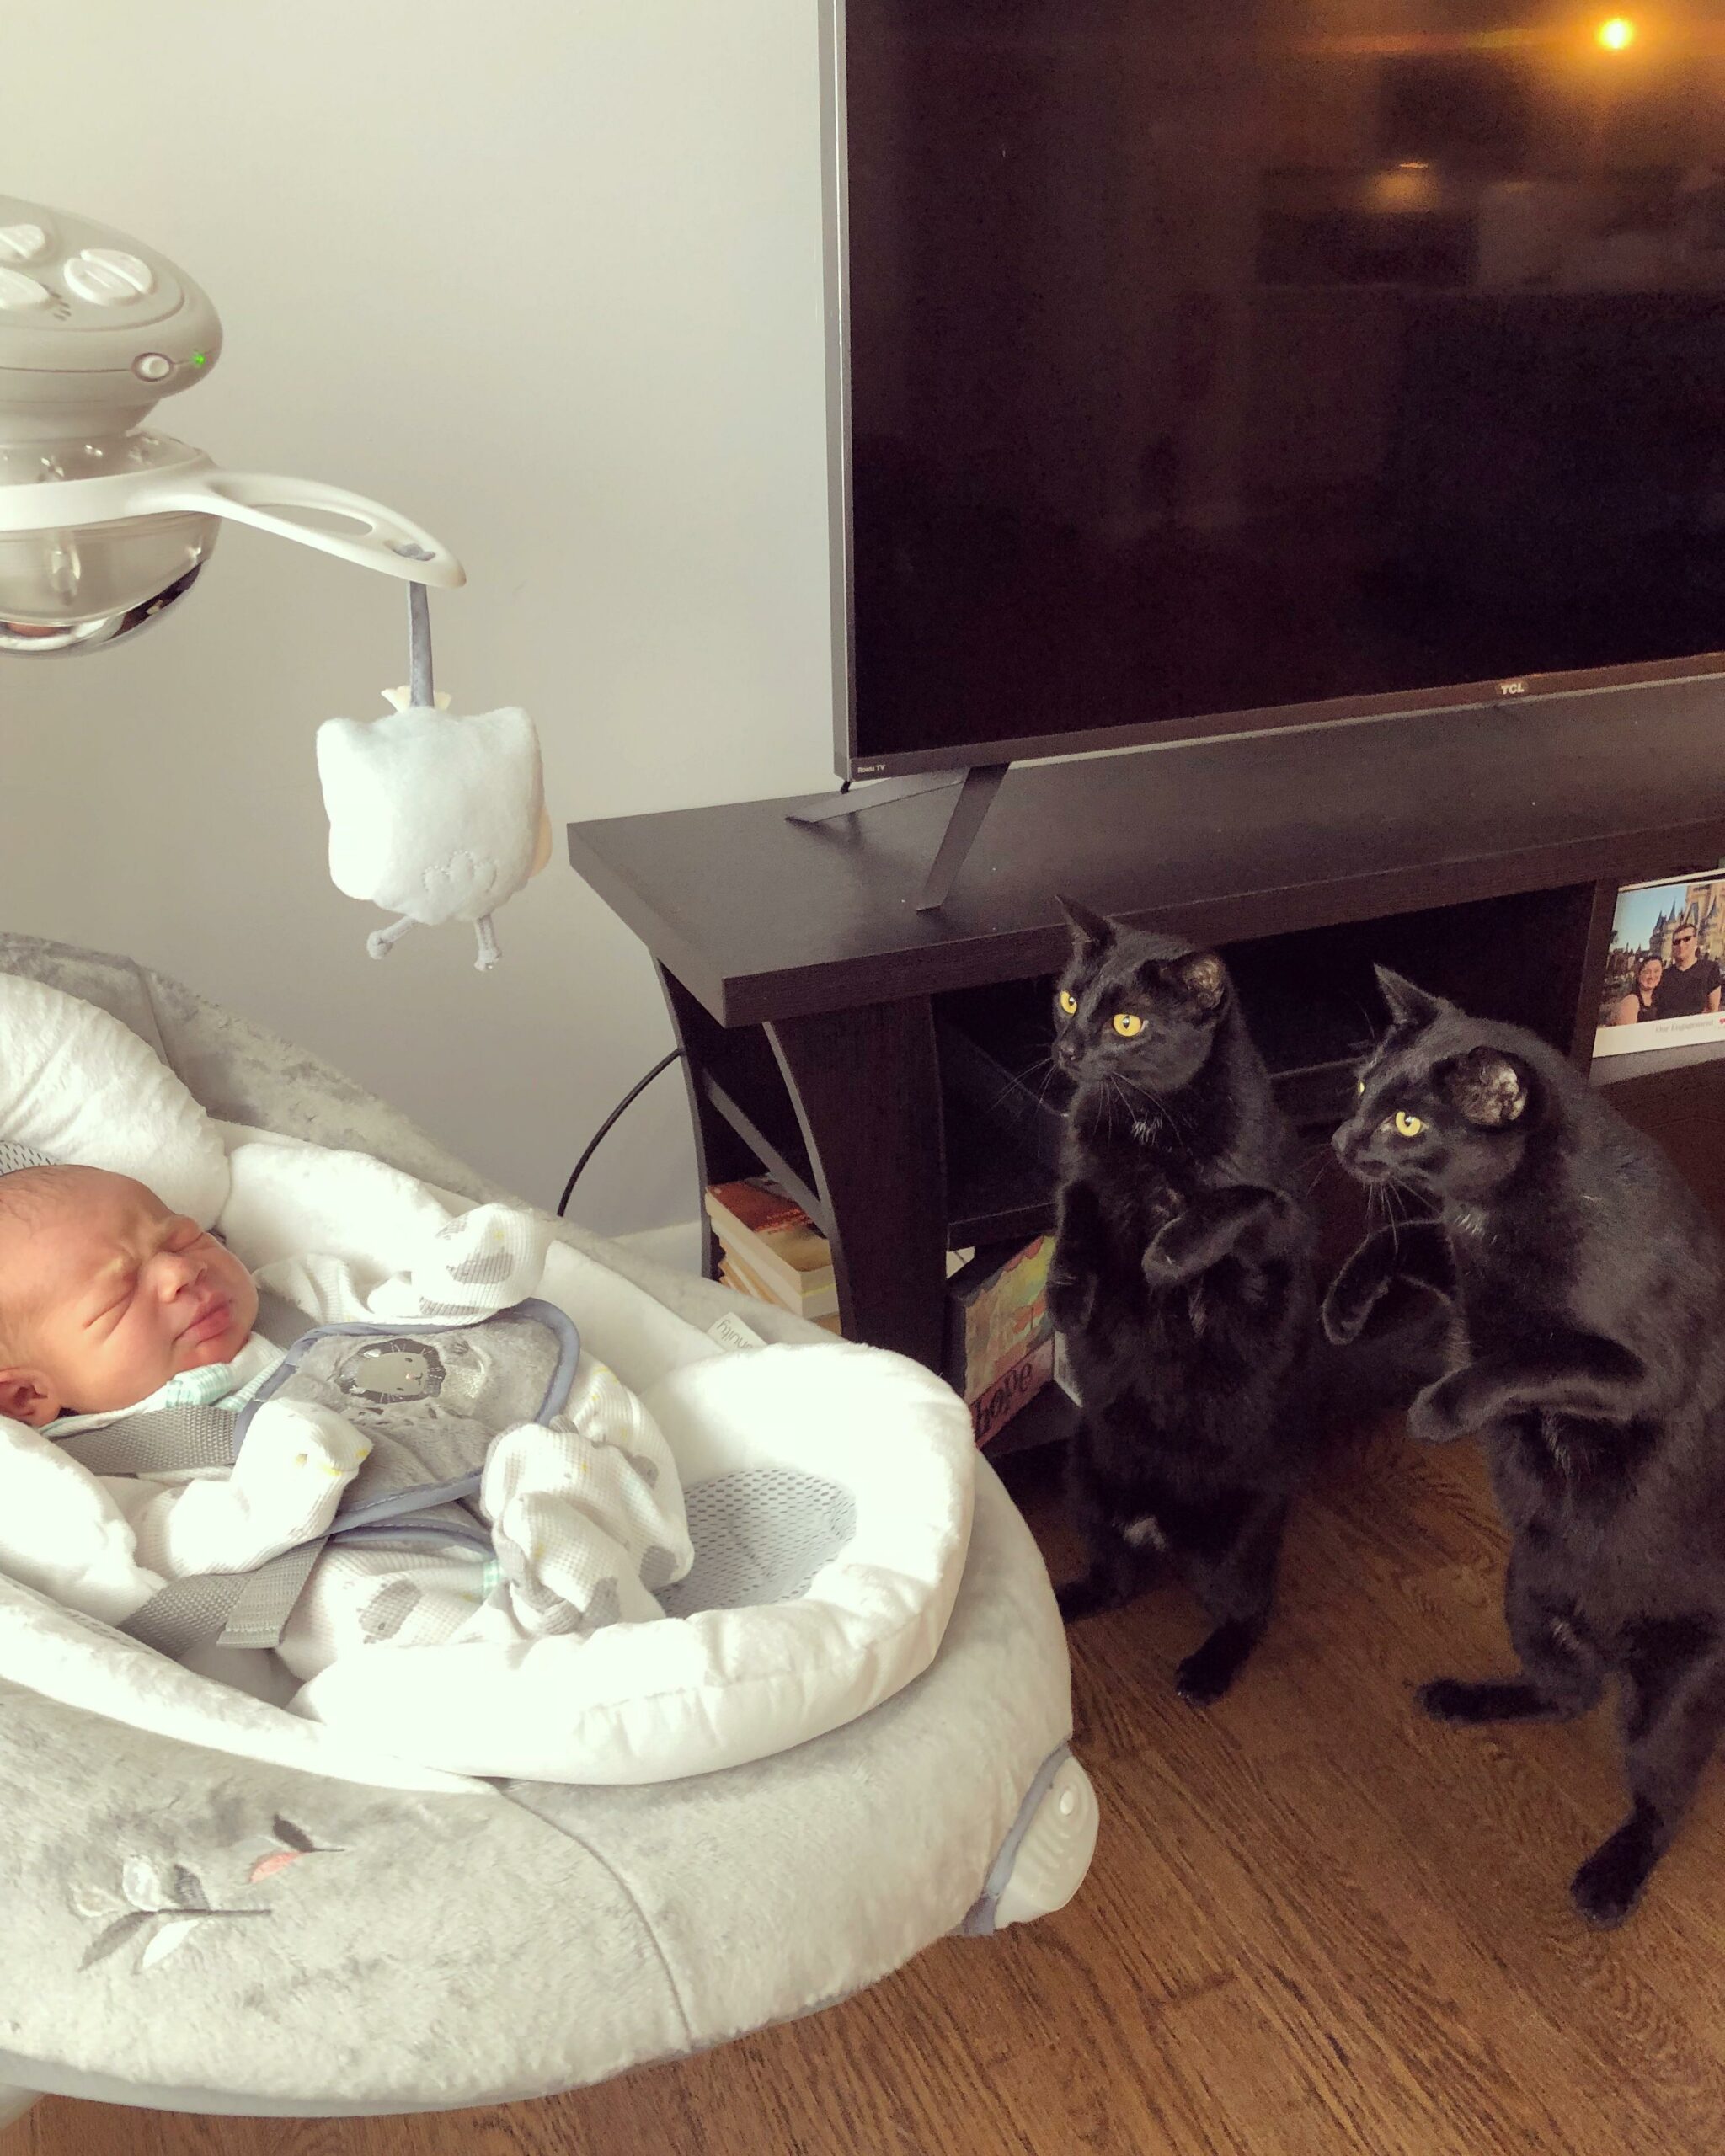 two black cats standing on hind legs looking at new infant